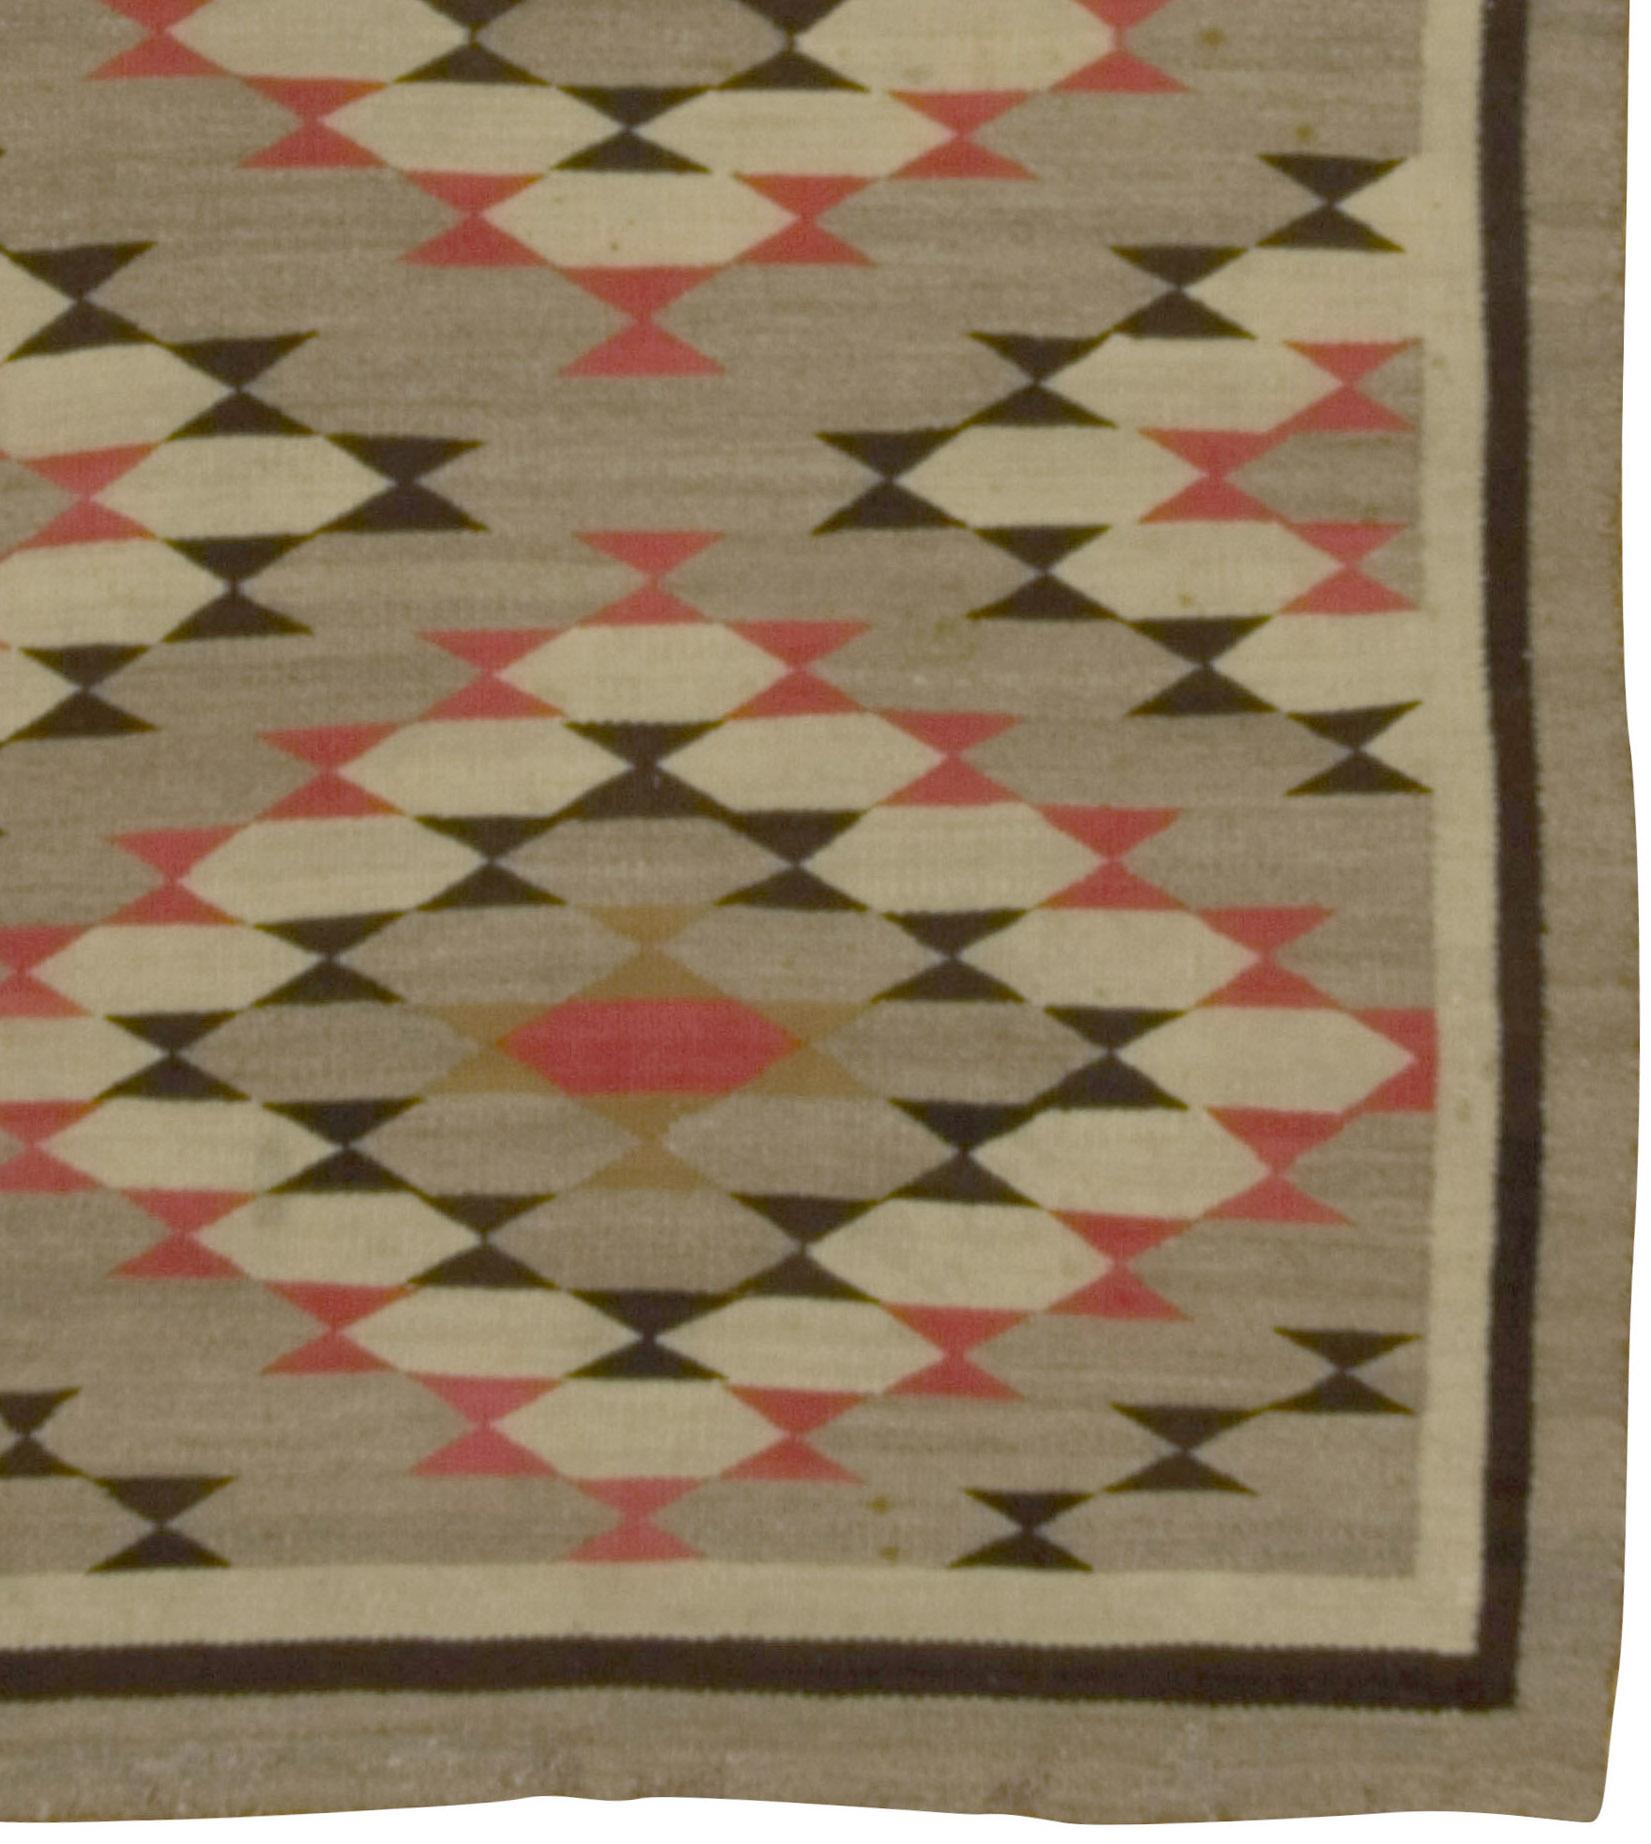 Vintage Navajo rug Kilim, circa 1940, 3'7 x 4'10. Although not attributable to a specific weaving site and too late for an eye dazzler this attractive rustic weaving beguiles with the pattern of saw tooth diamonds on the naturally abrashed gray